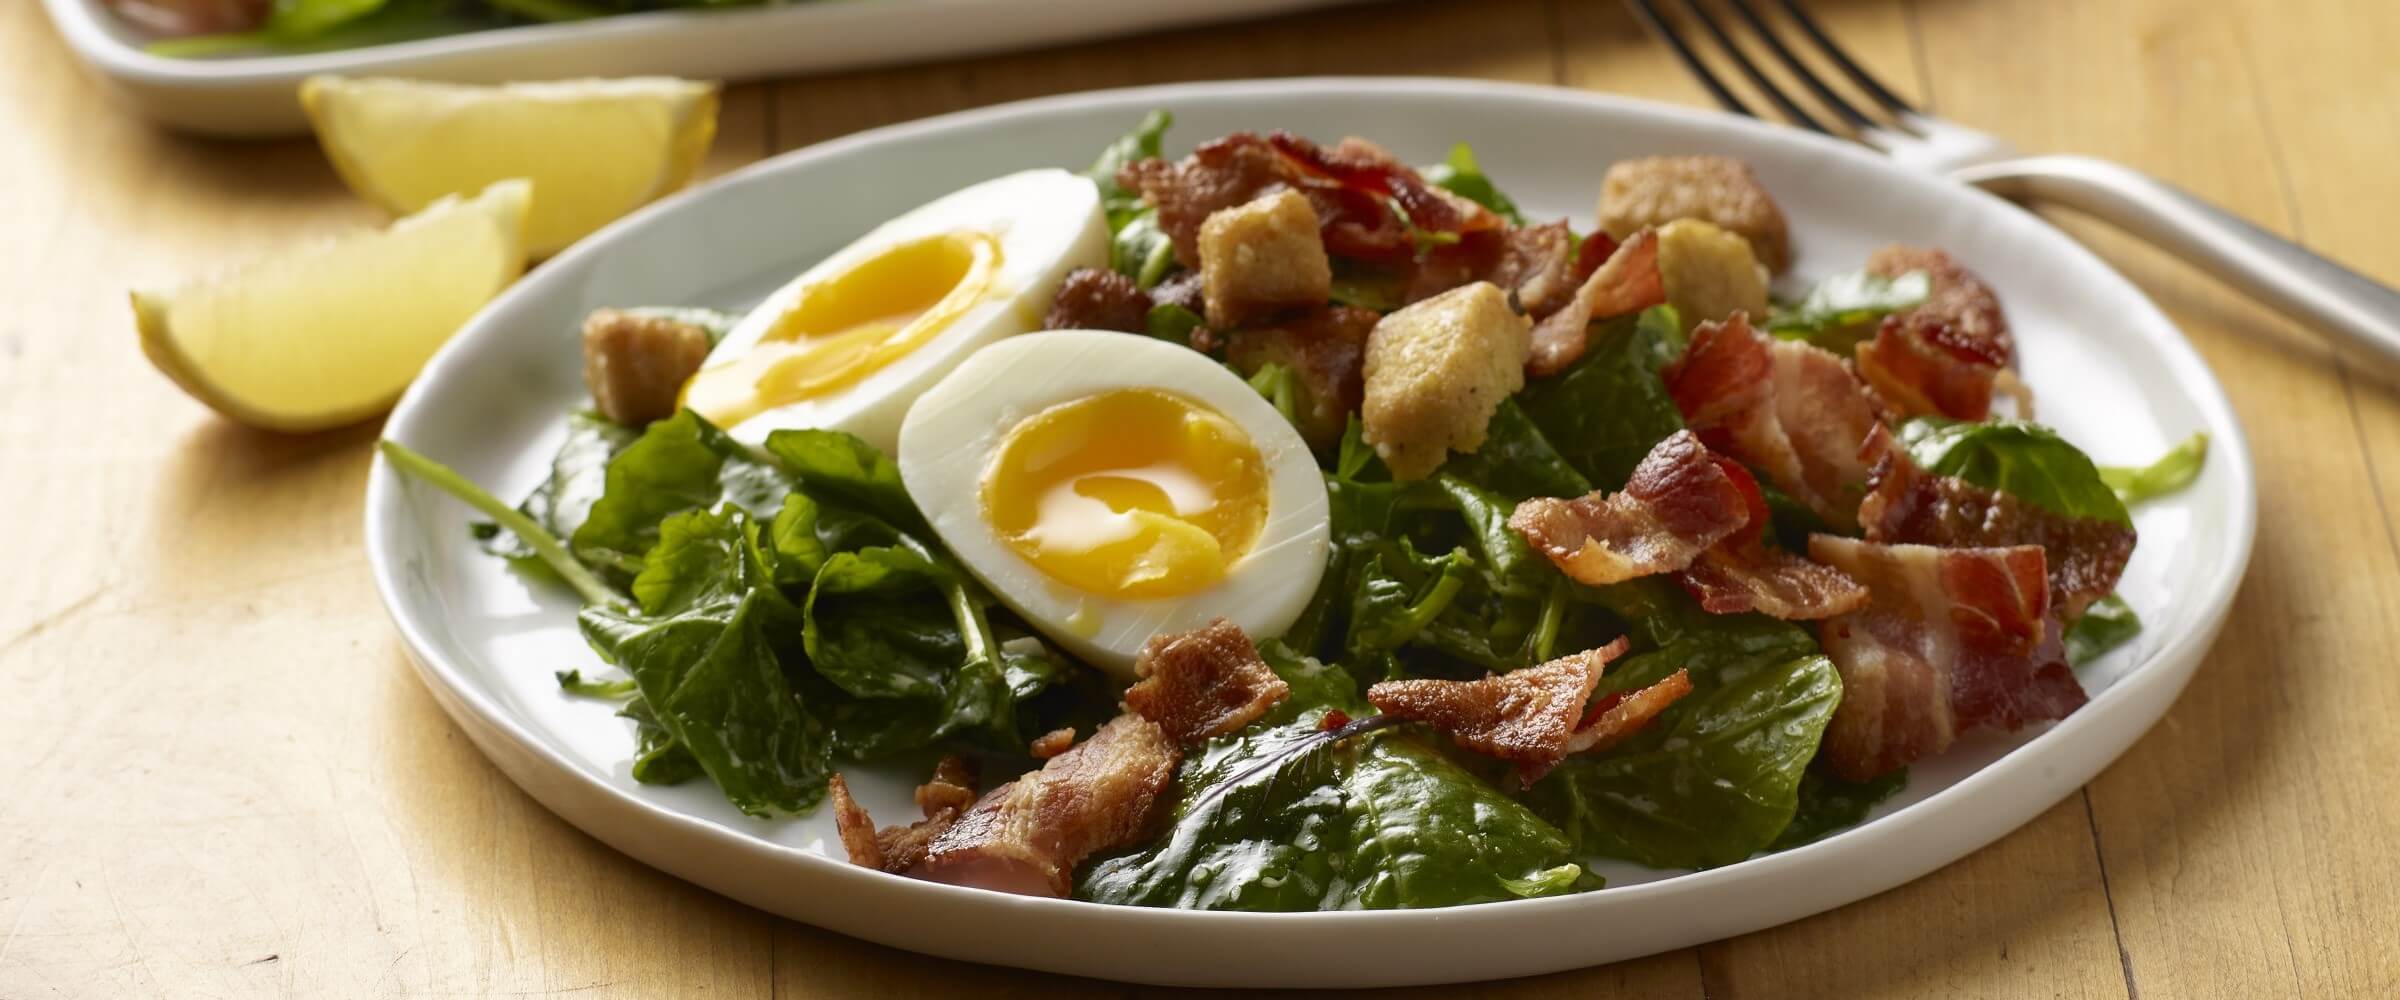 kale caesar salad with egg and bacon on white plate with lemon wedges